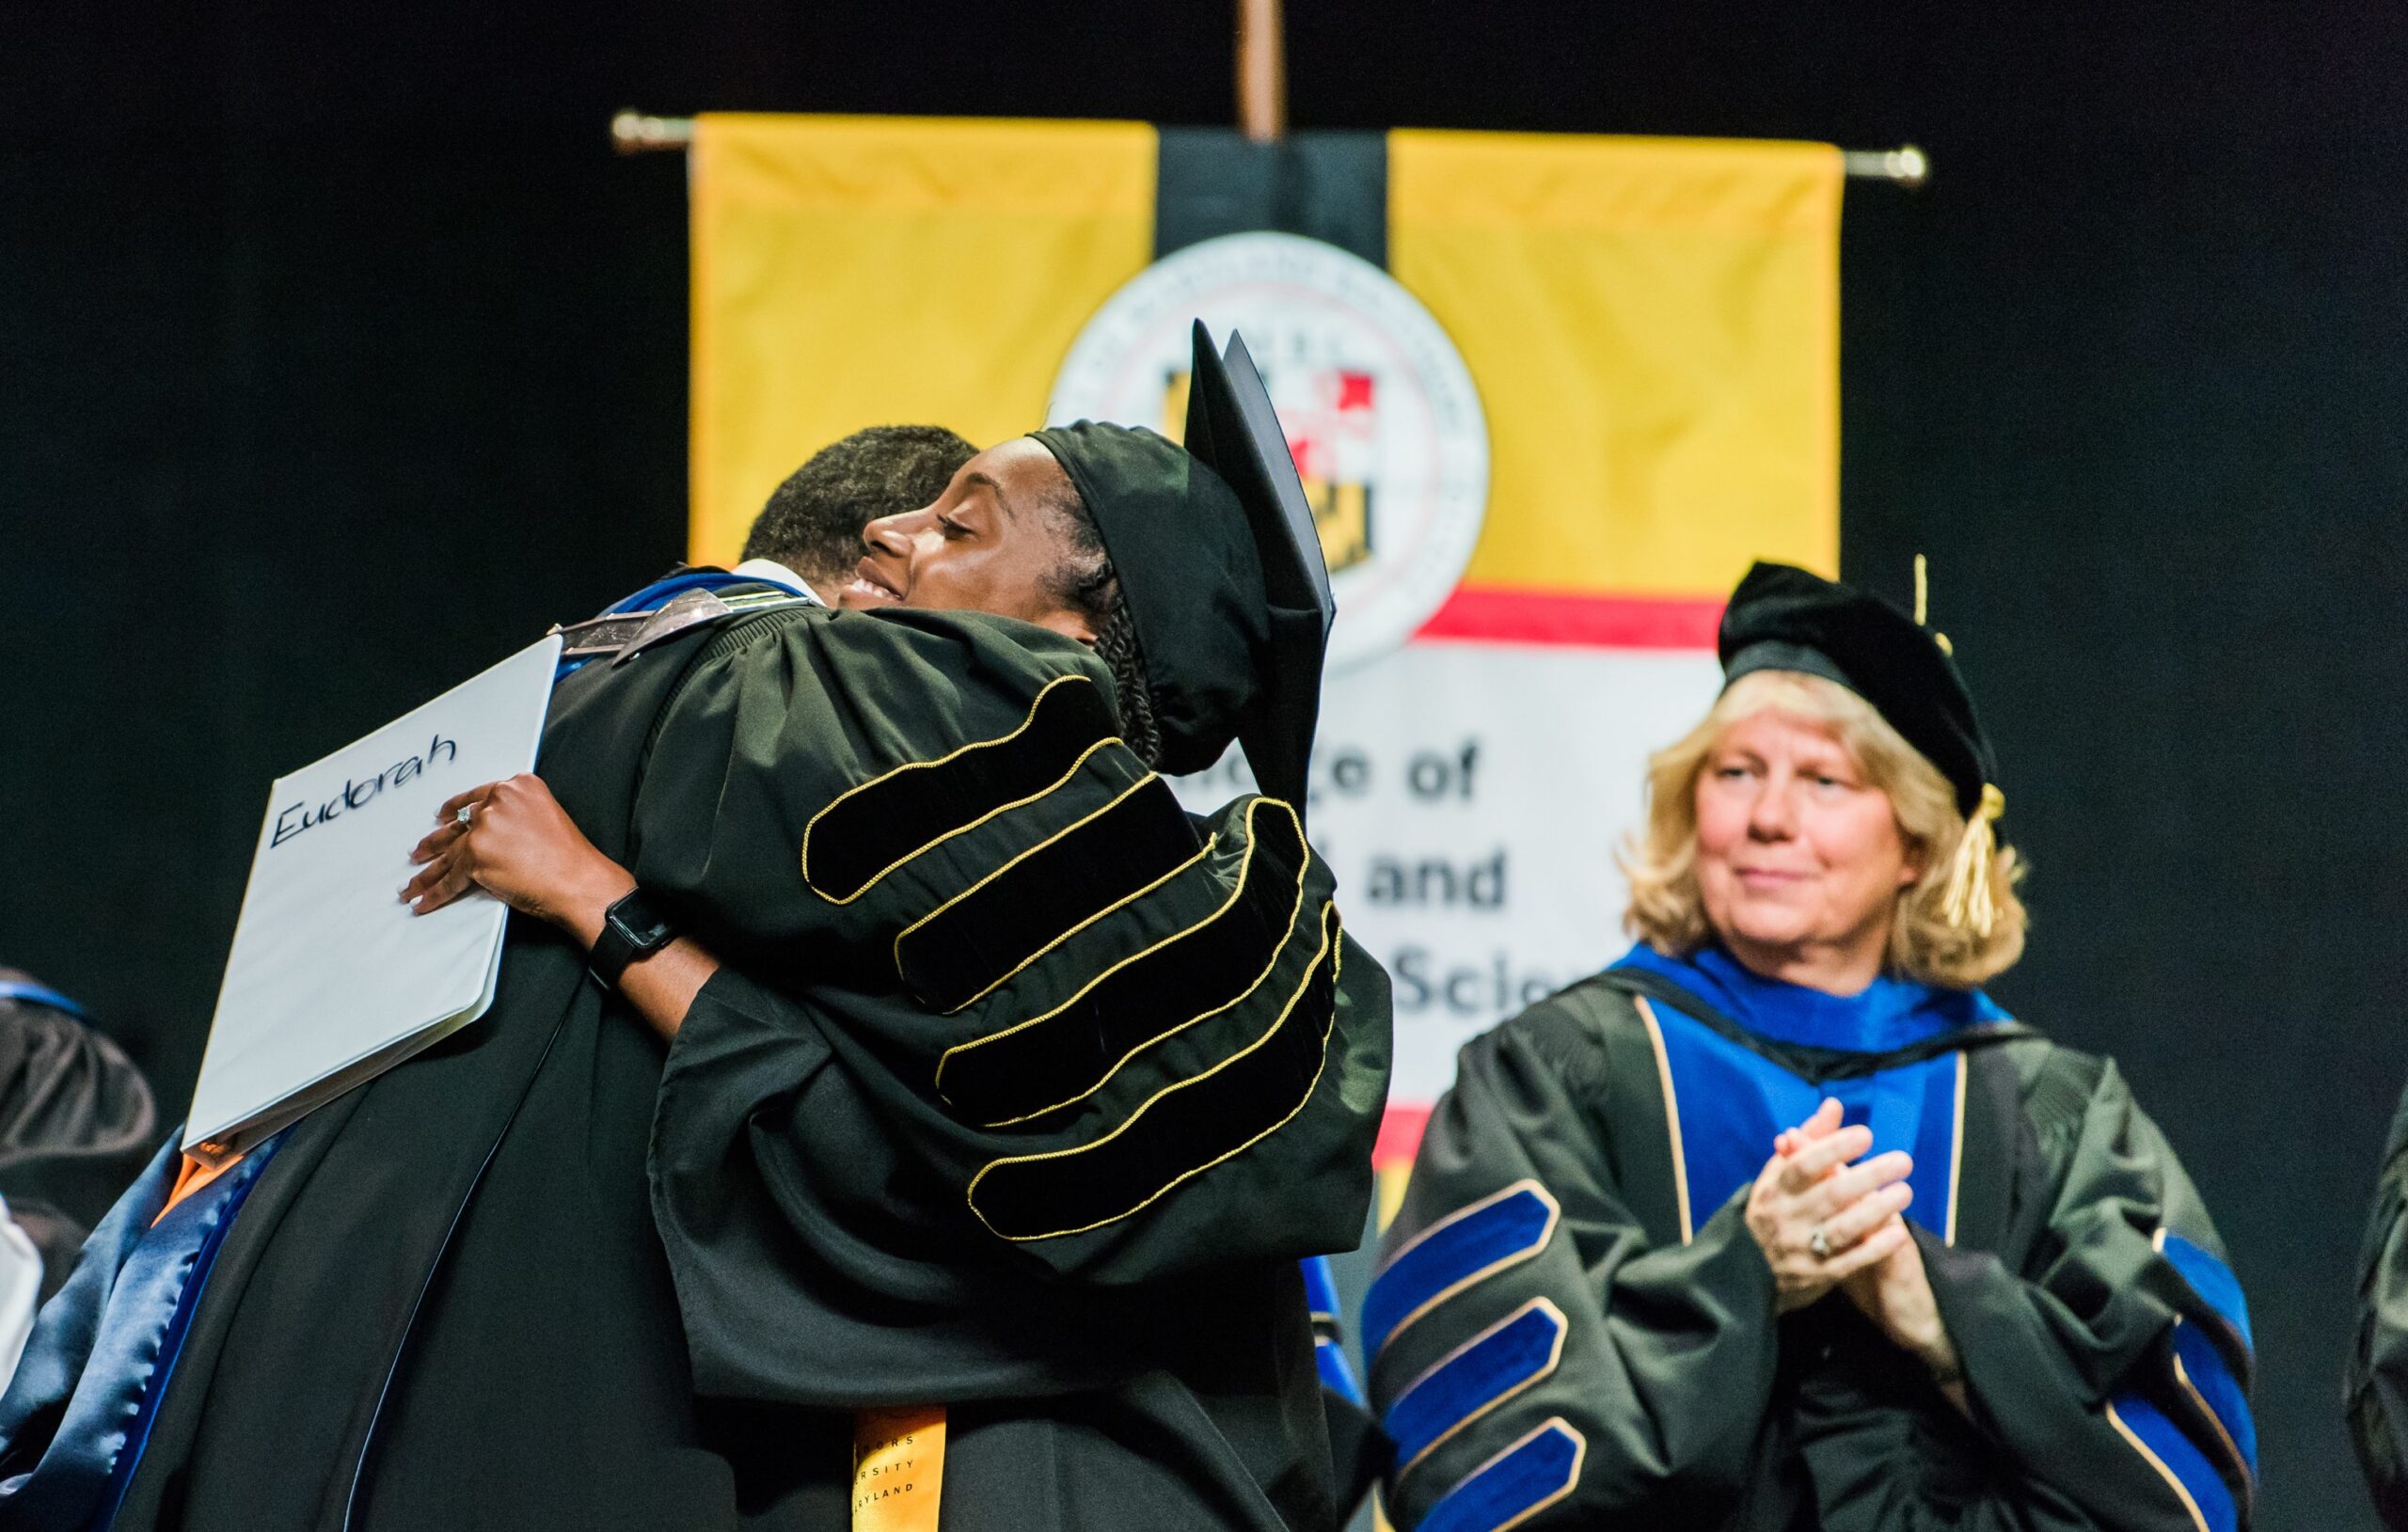 University president hugs undergraduate commencement speaker in congratulations following her remarks, while colleagues clap, all in graduation attire.